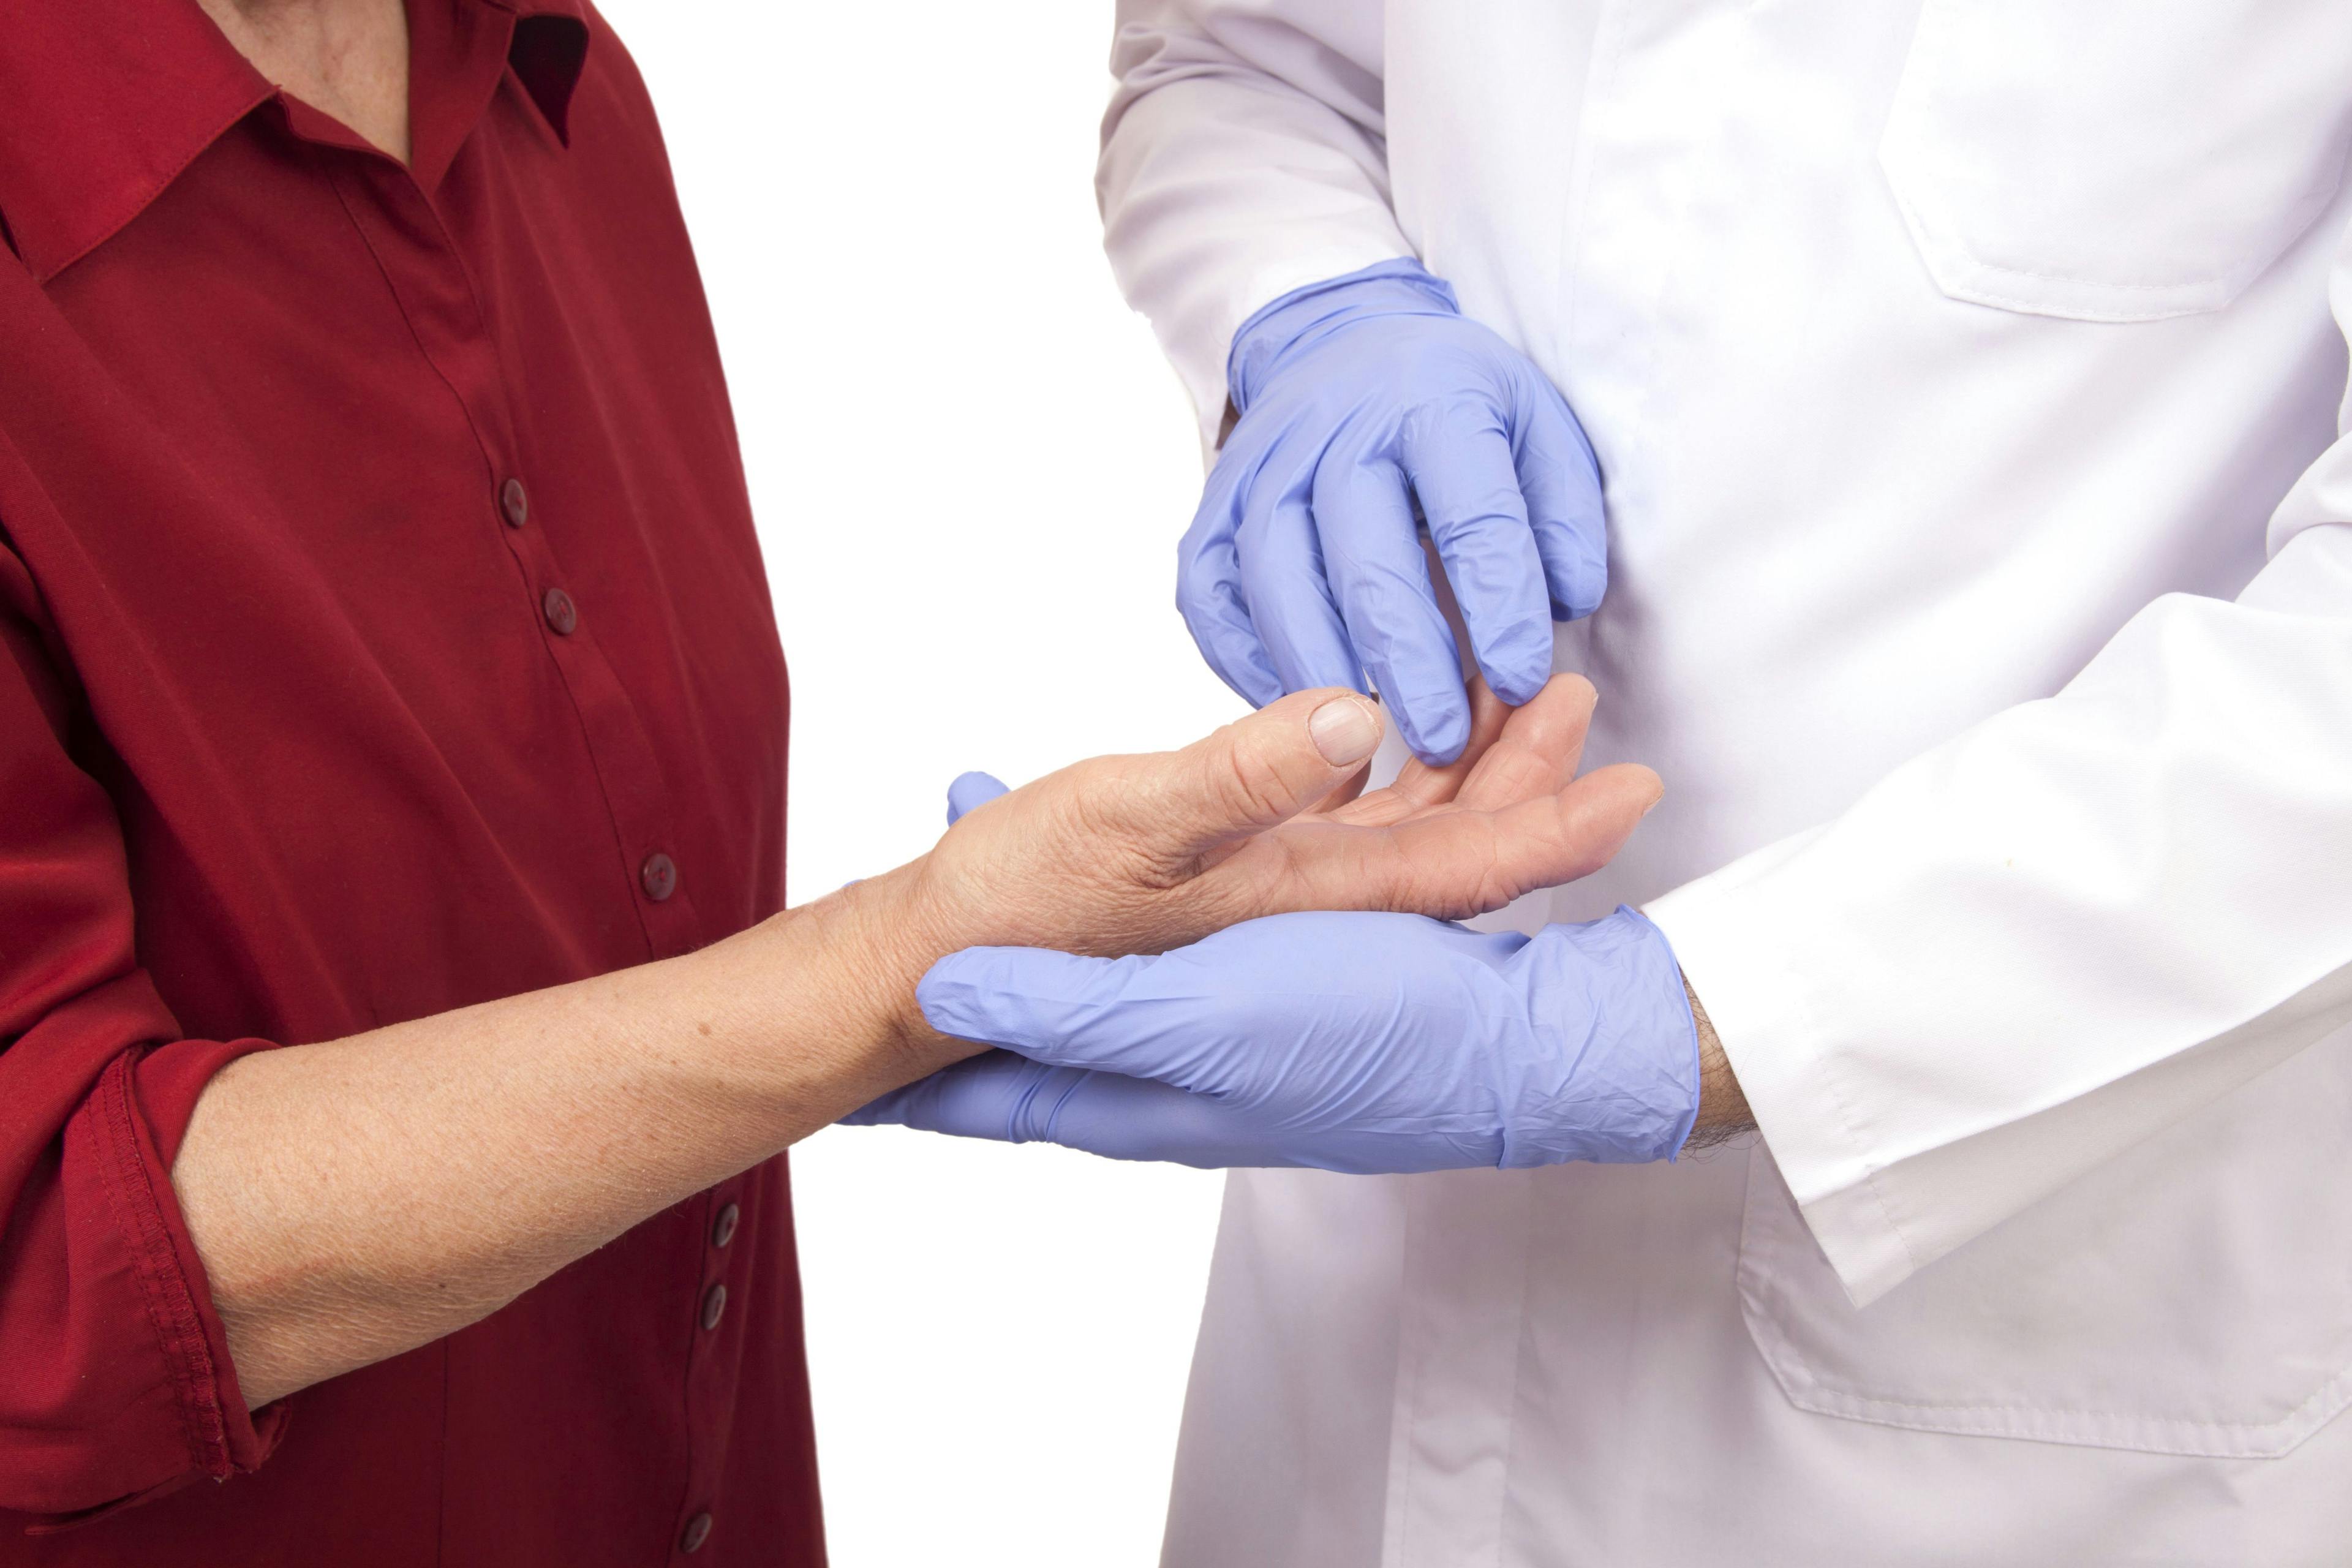 Physician checking joint swelling of patient.